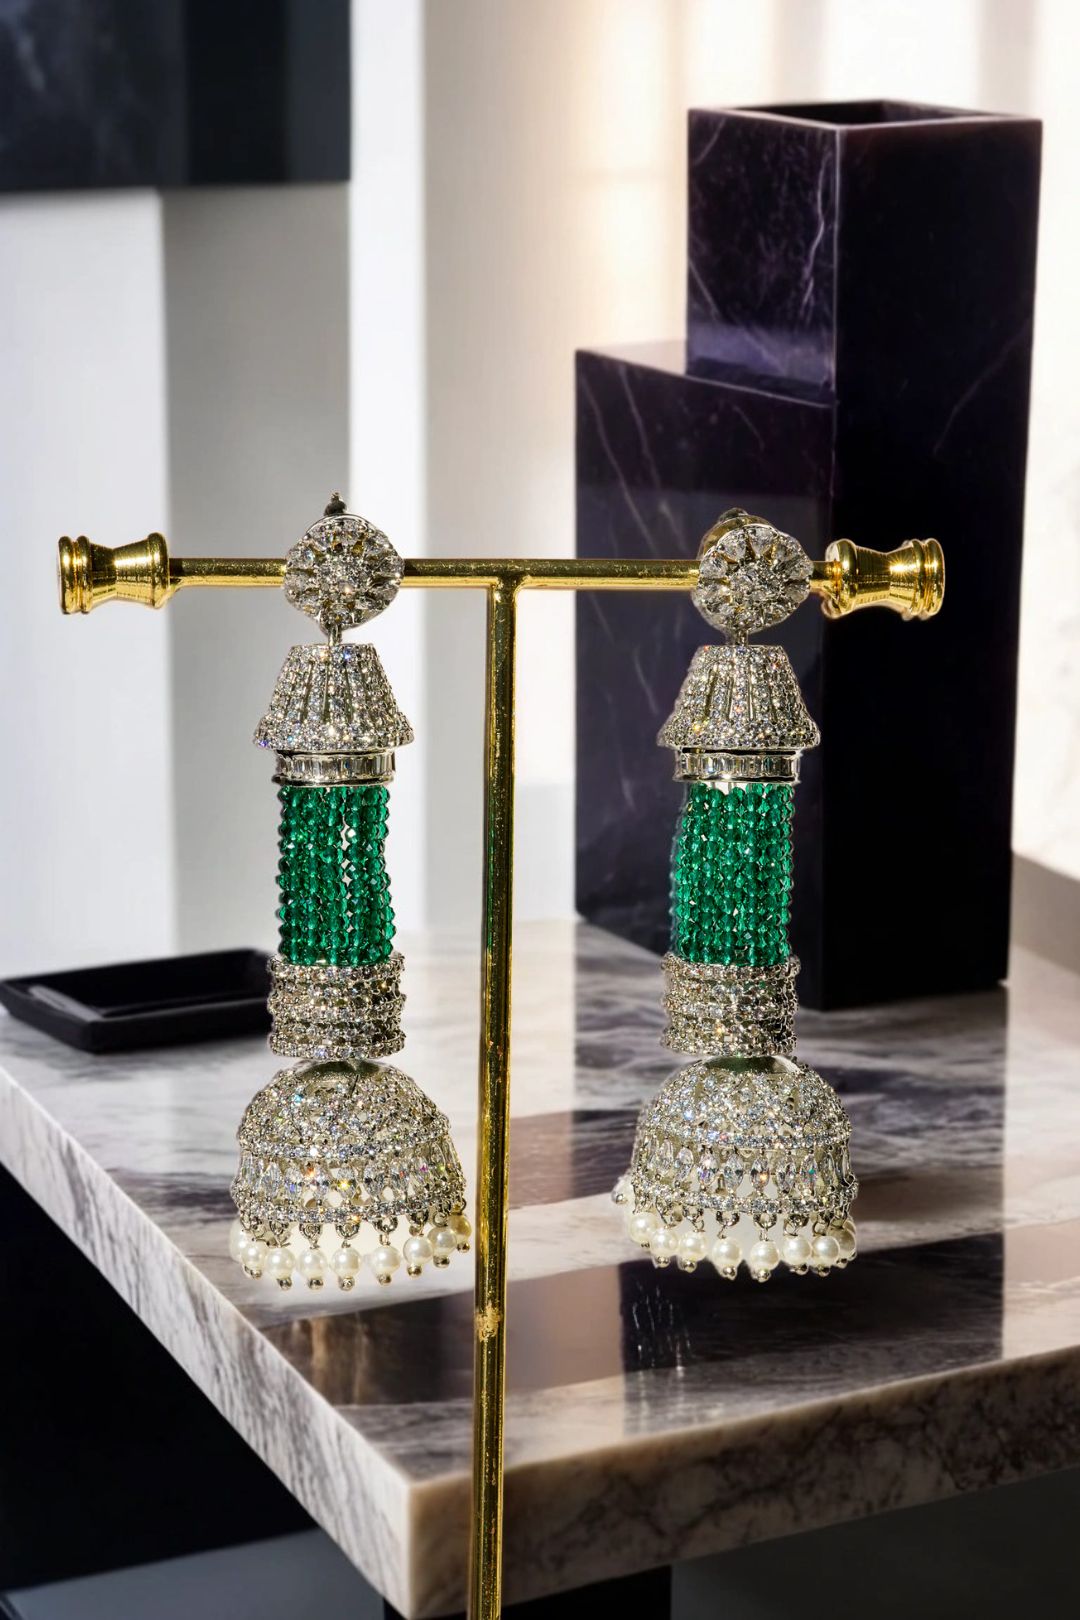 Riya Tassel AD Chandelier Earrings with Jhumkas in pink, green, and light green with AD stones and diamante accents